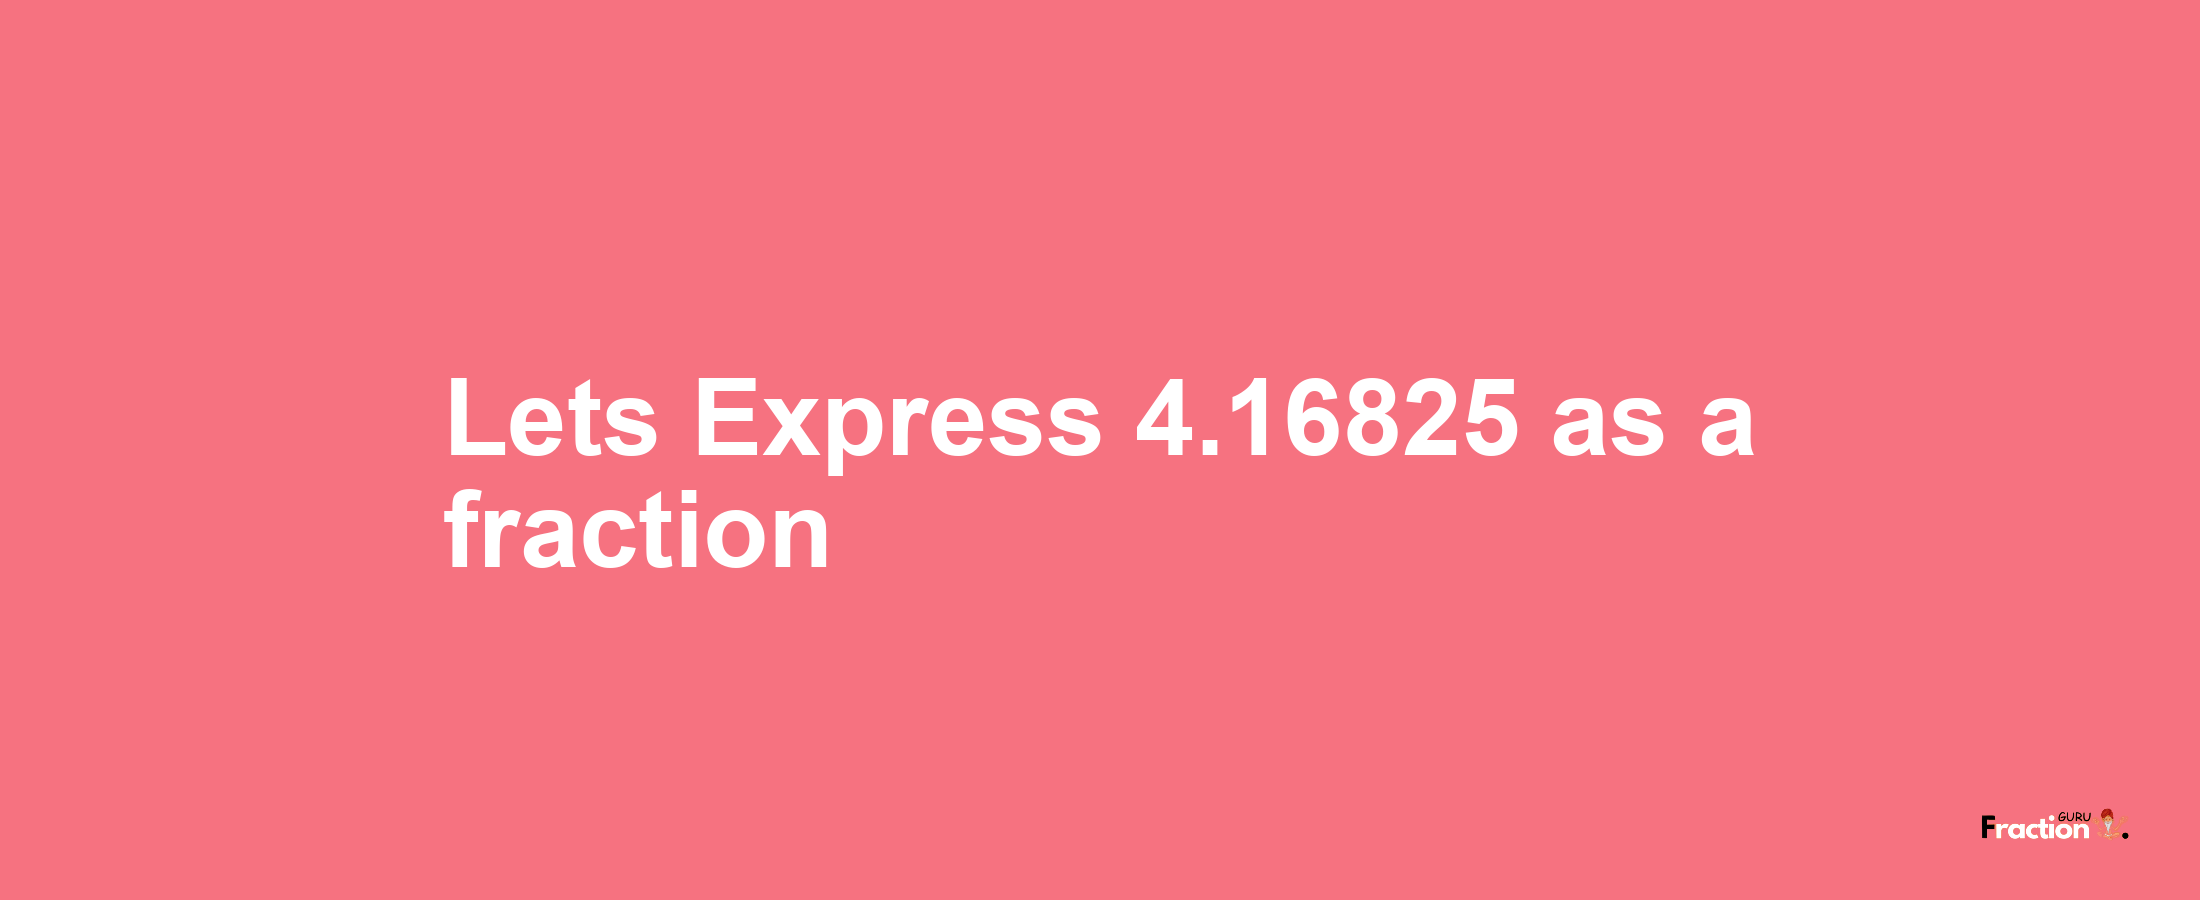 Lets Express 4.16825 as afraction